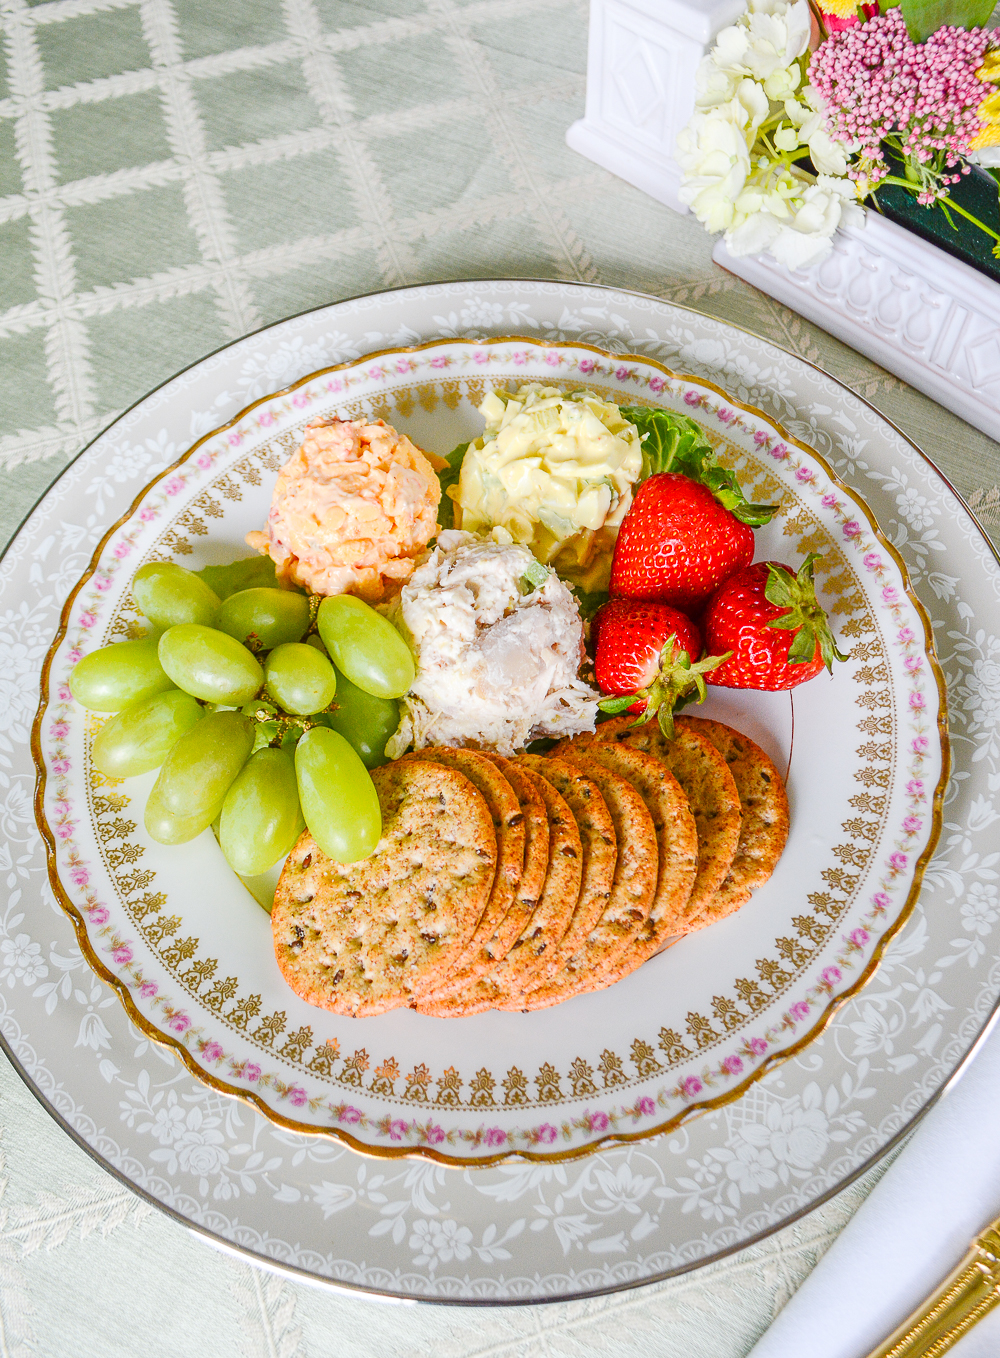 Classic Southern trio salad plate with chicken salad, egg salad, and pimiento cheese